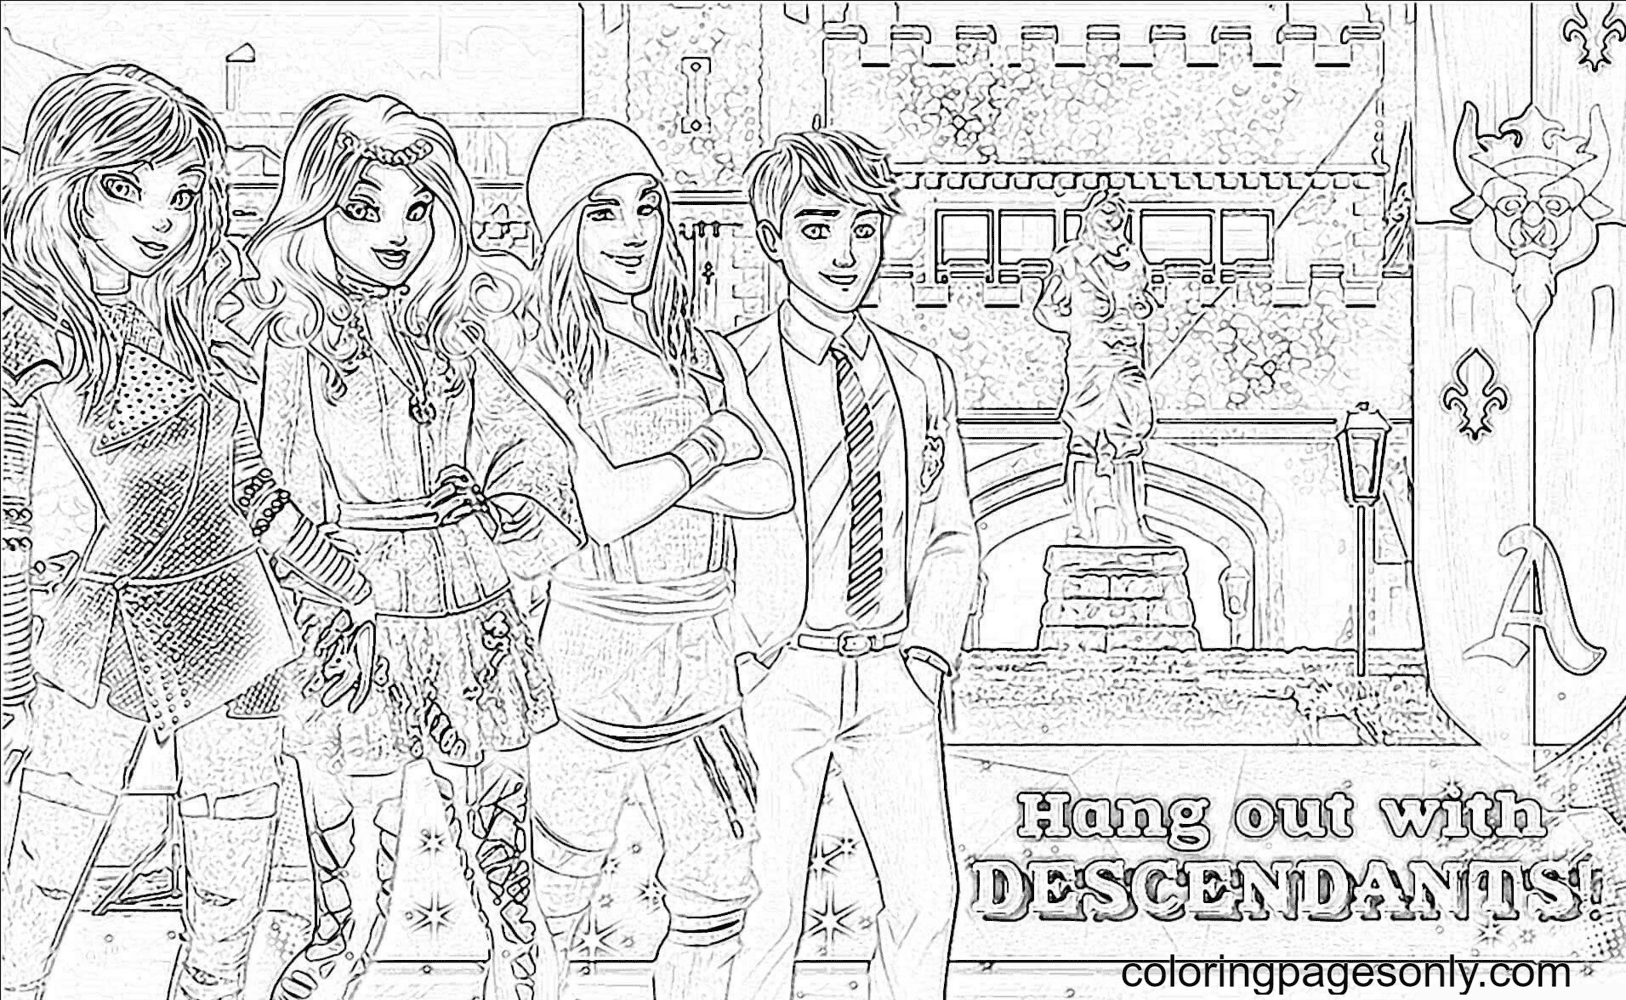 mal evie jay and ben descendants coloring pages descendants coloring pages coloring pages for kids and adults